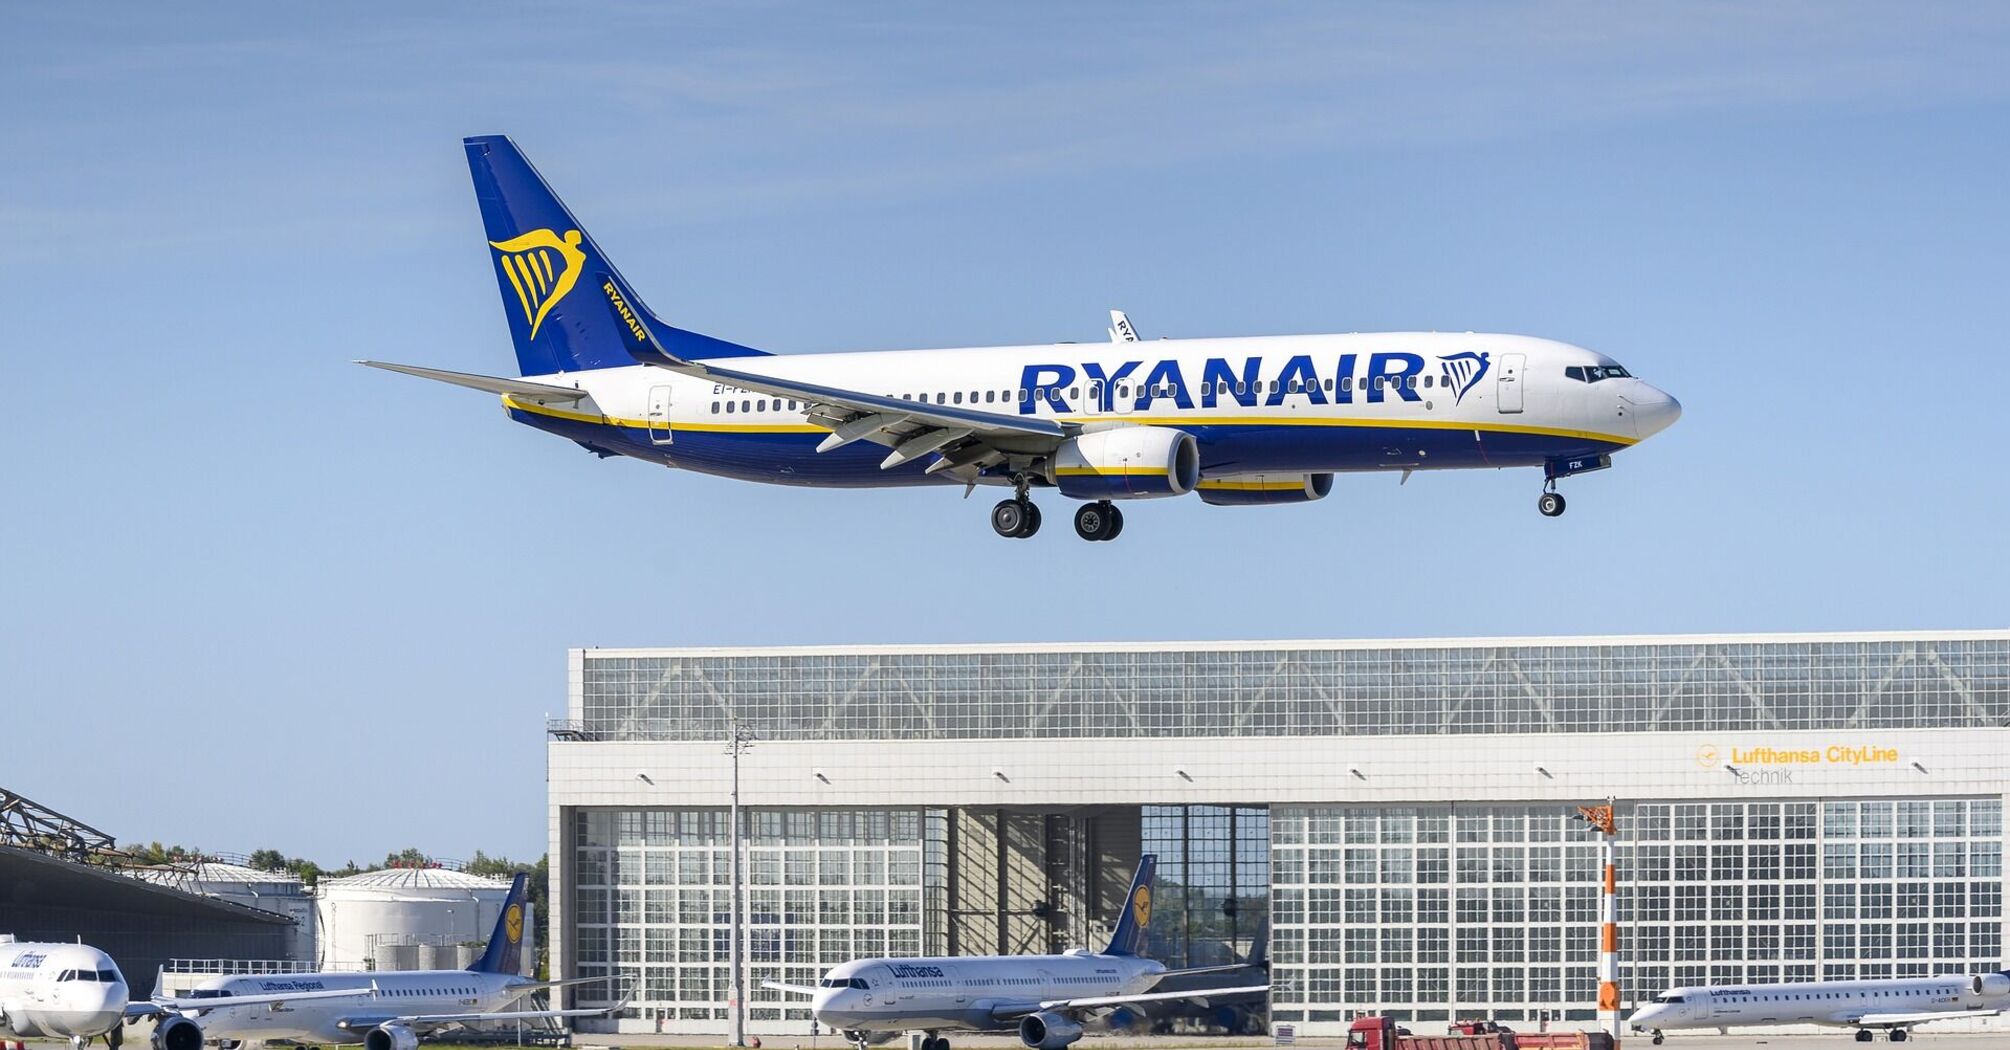 Ryanair airplane taking off with clear blue skies in the background